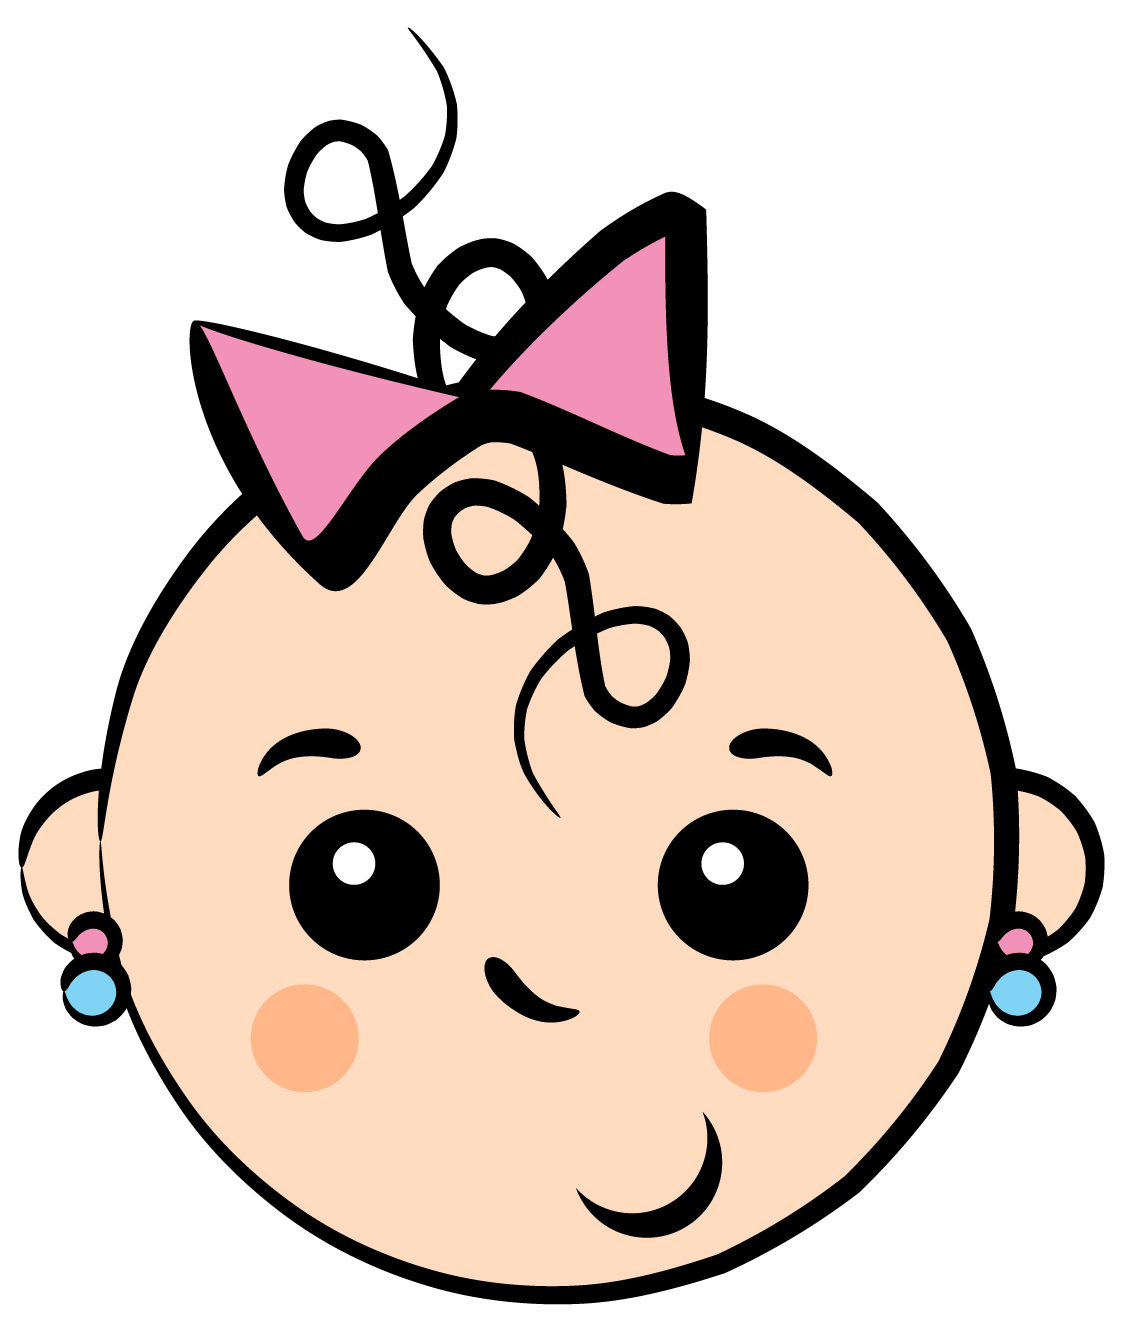 small baby shower clip art - photo #21